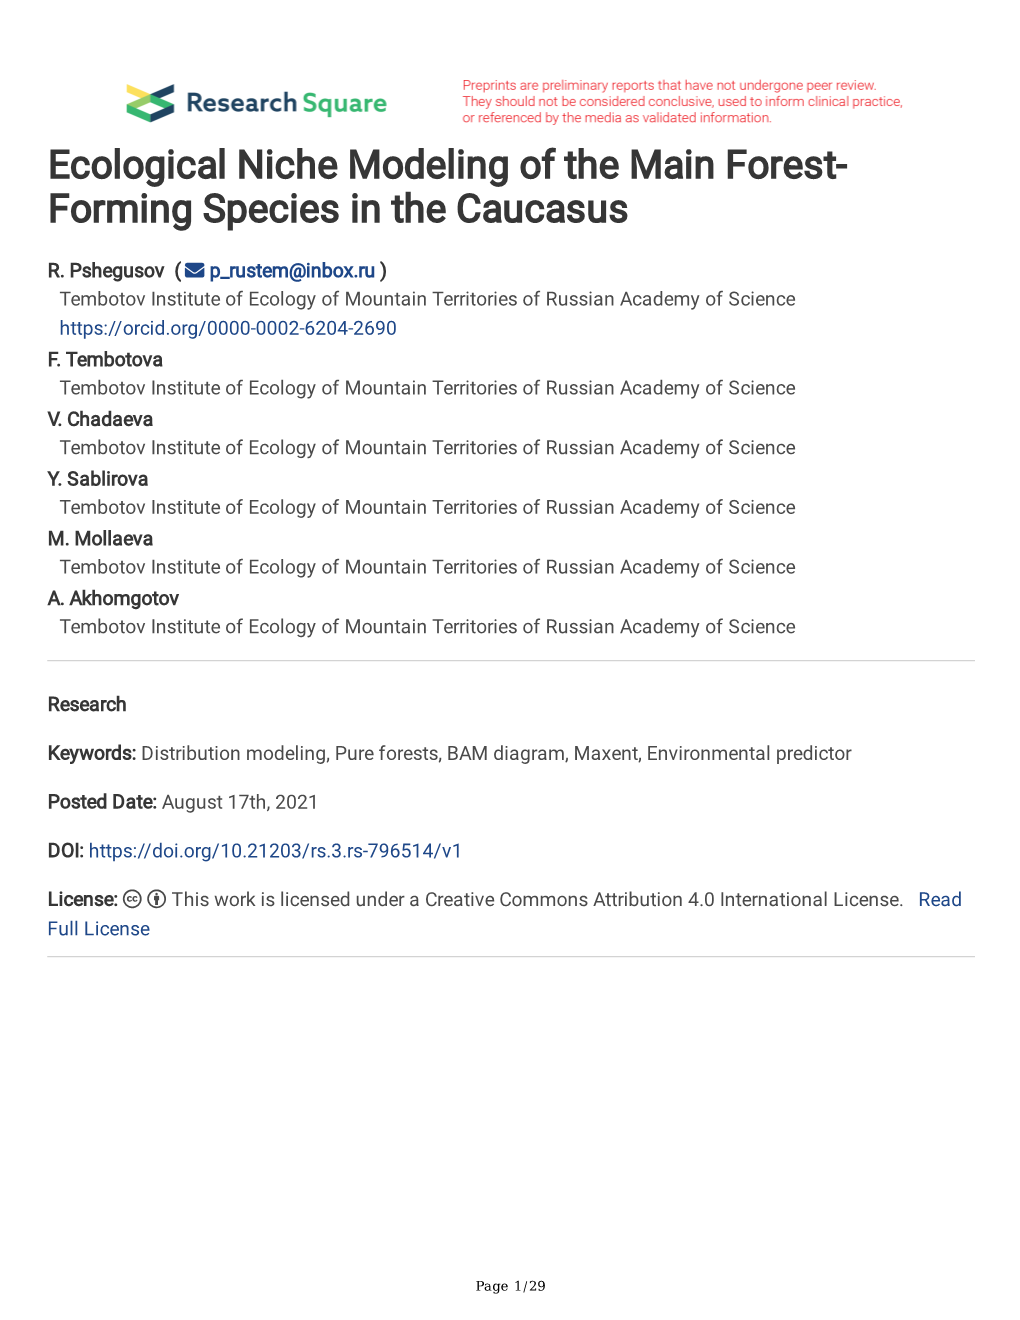 Ecological Niche Modeling of the Main Forest- Forming Species in the Caucasus